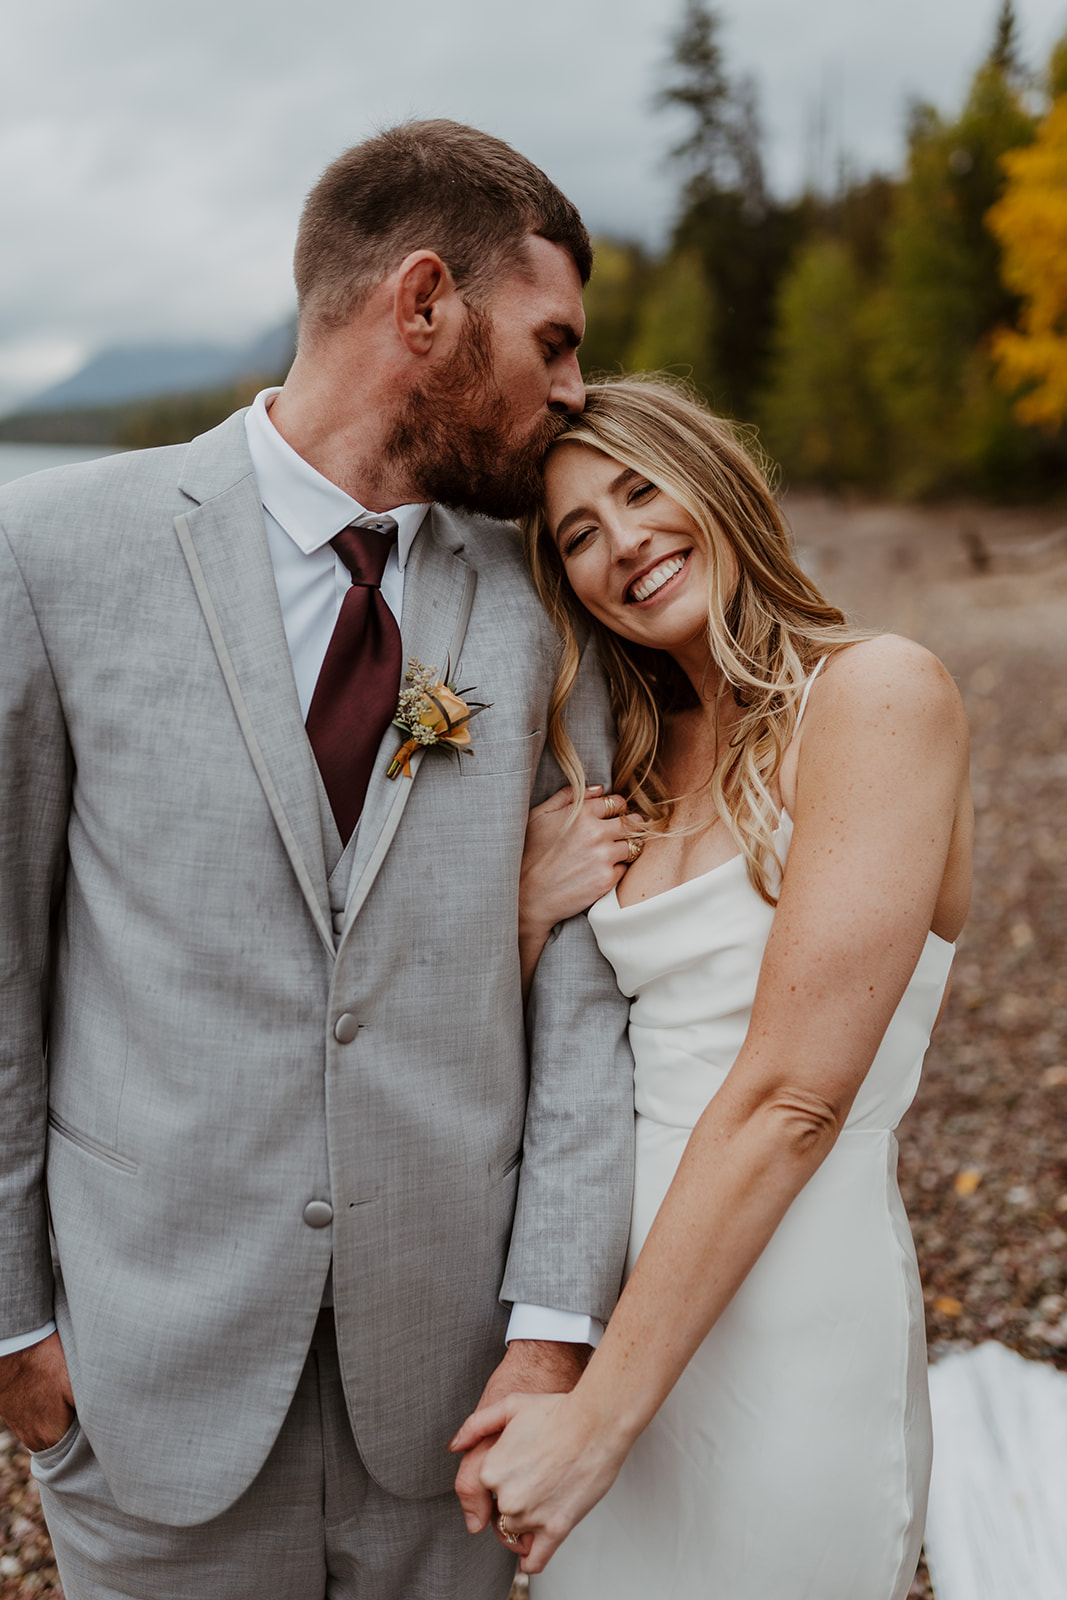 Kelsey smiling as Weston kisses the top of her head during their wedding in Glacier National Park.